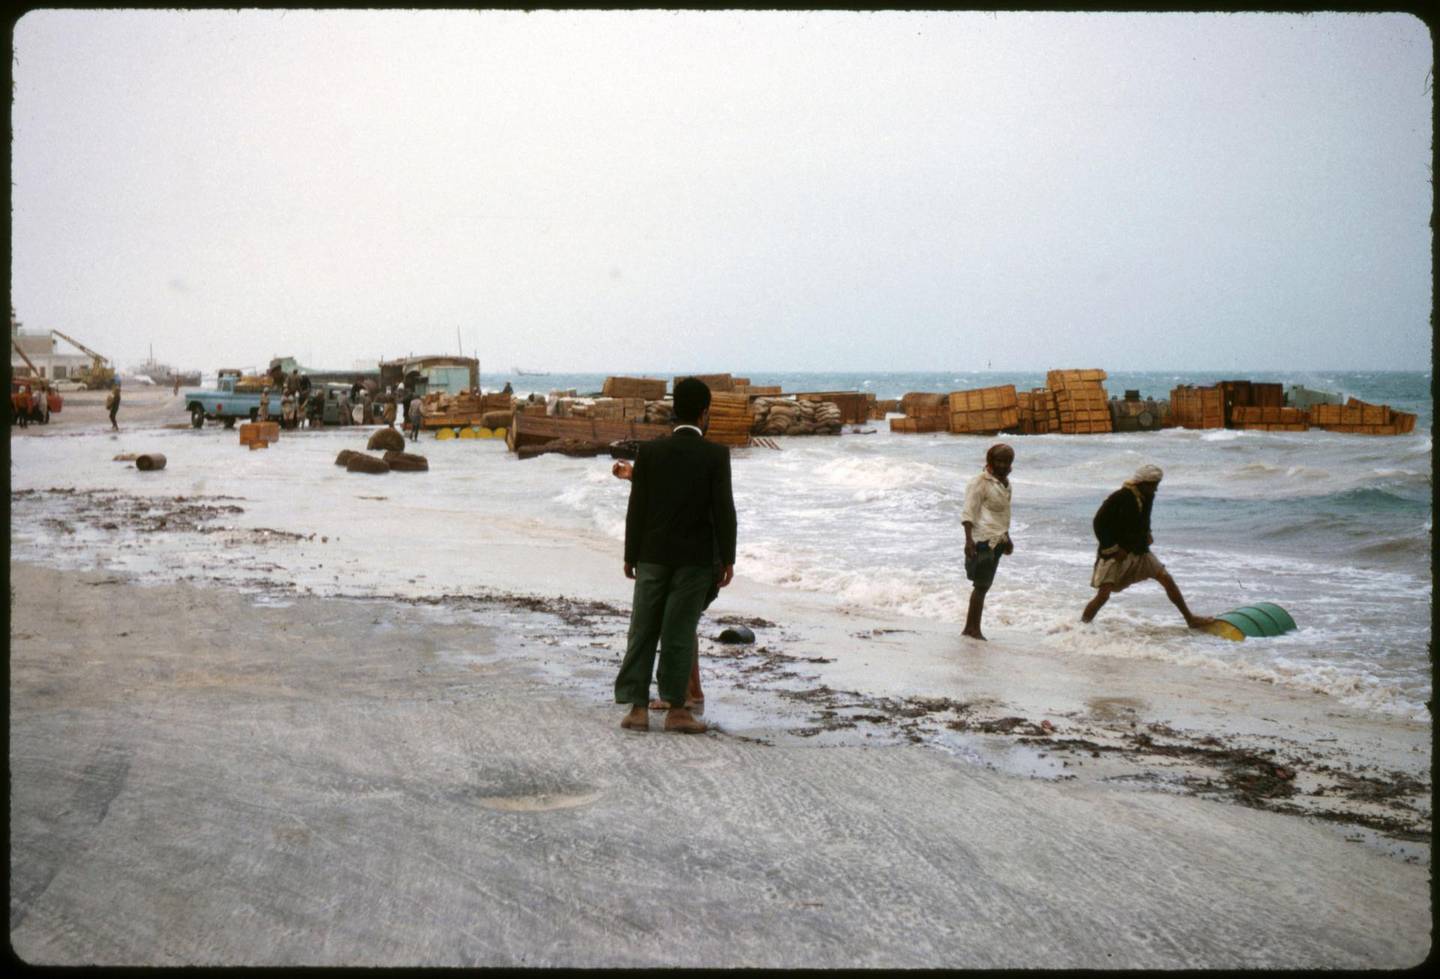 A storm on Abu Dhabi's Corniche at some point between 1962 and 1964. Courtesy: David Riley